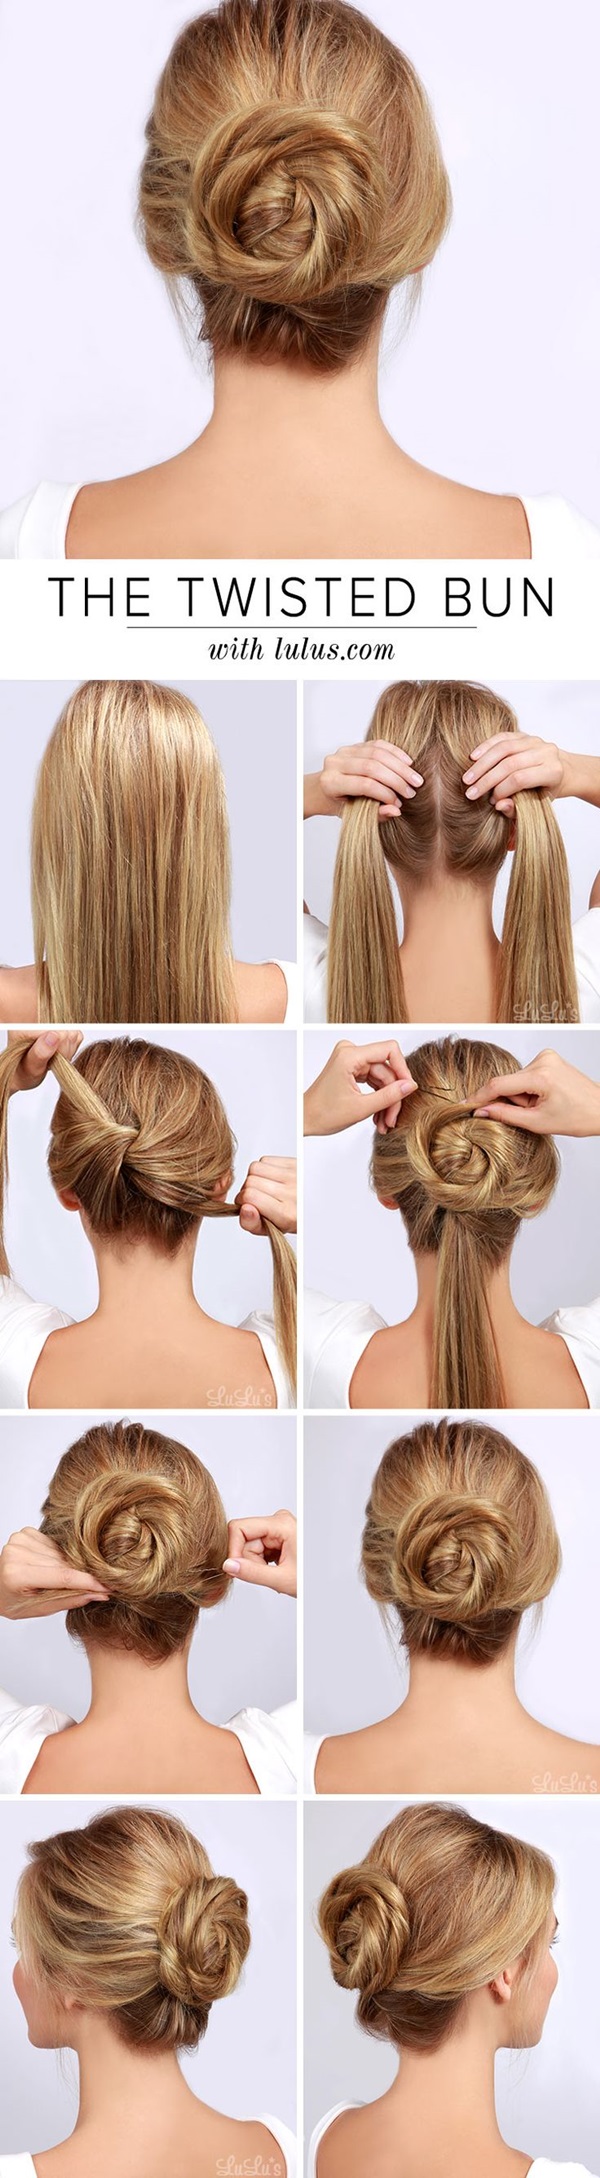 Simple Five Minute Hairstyles (5)